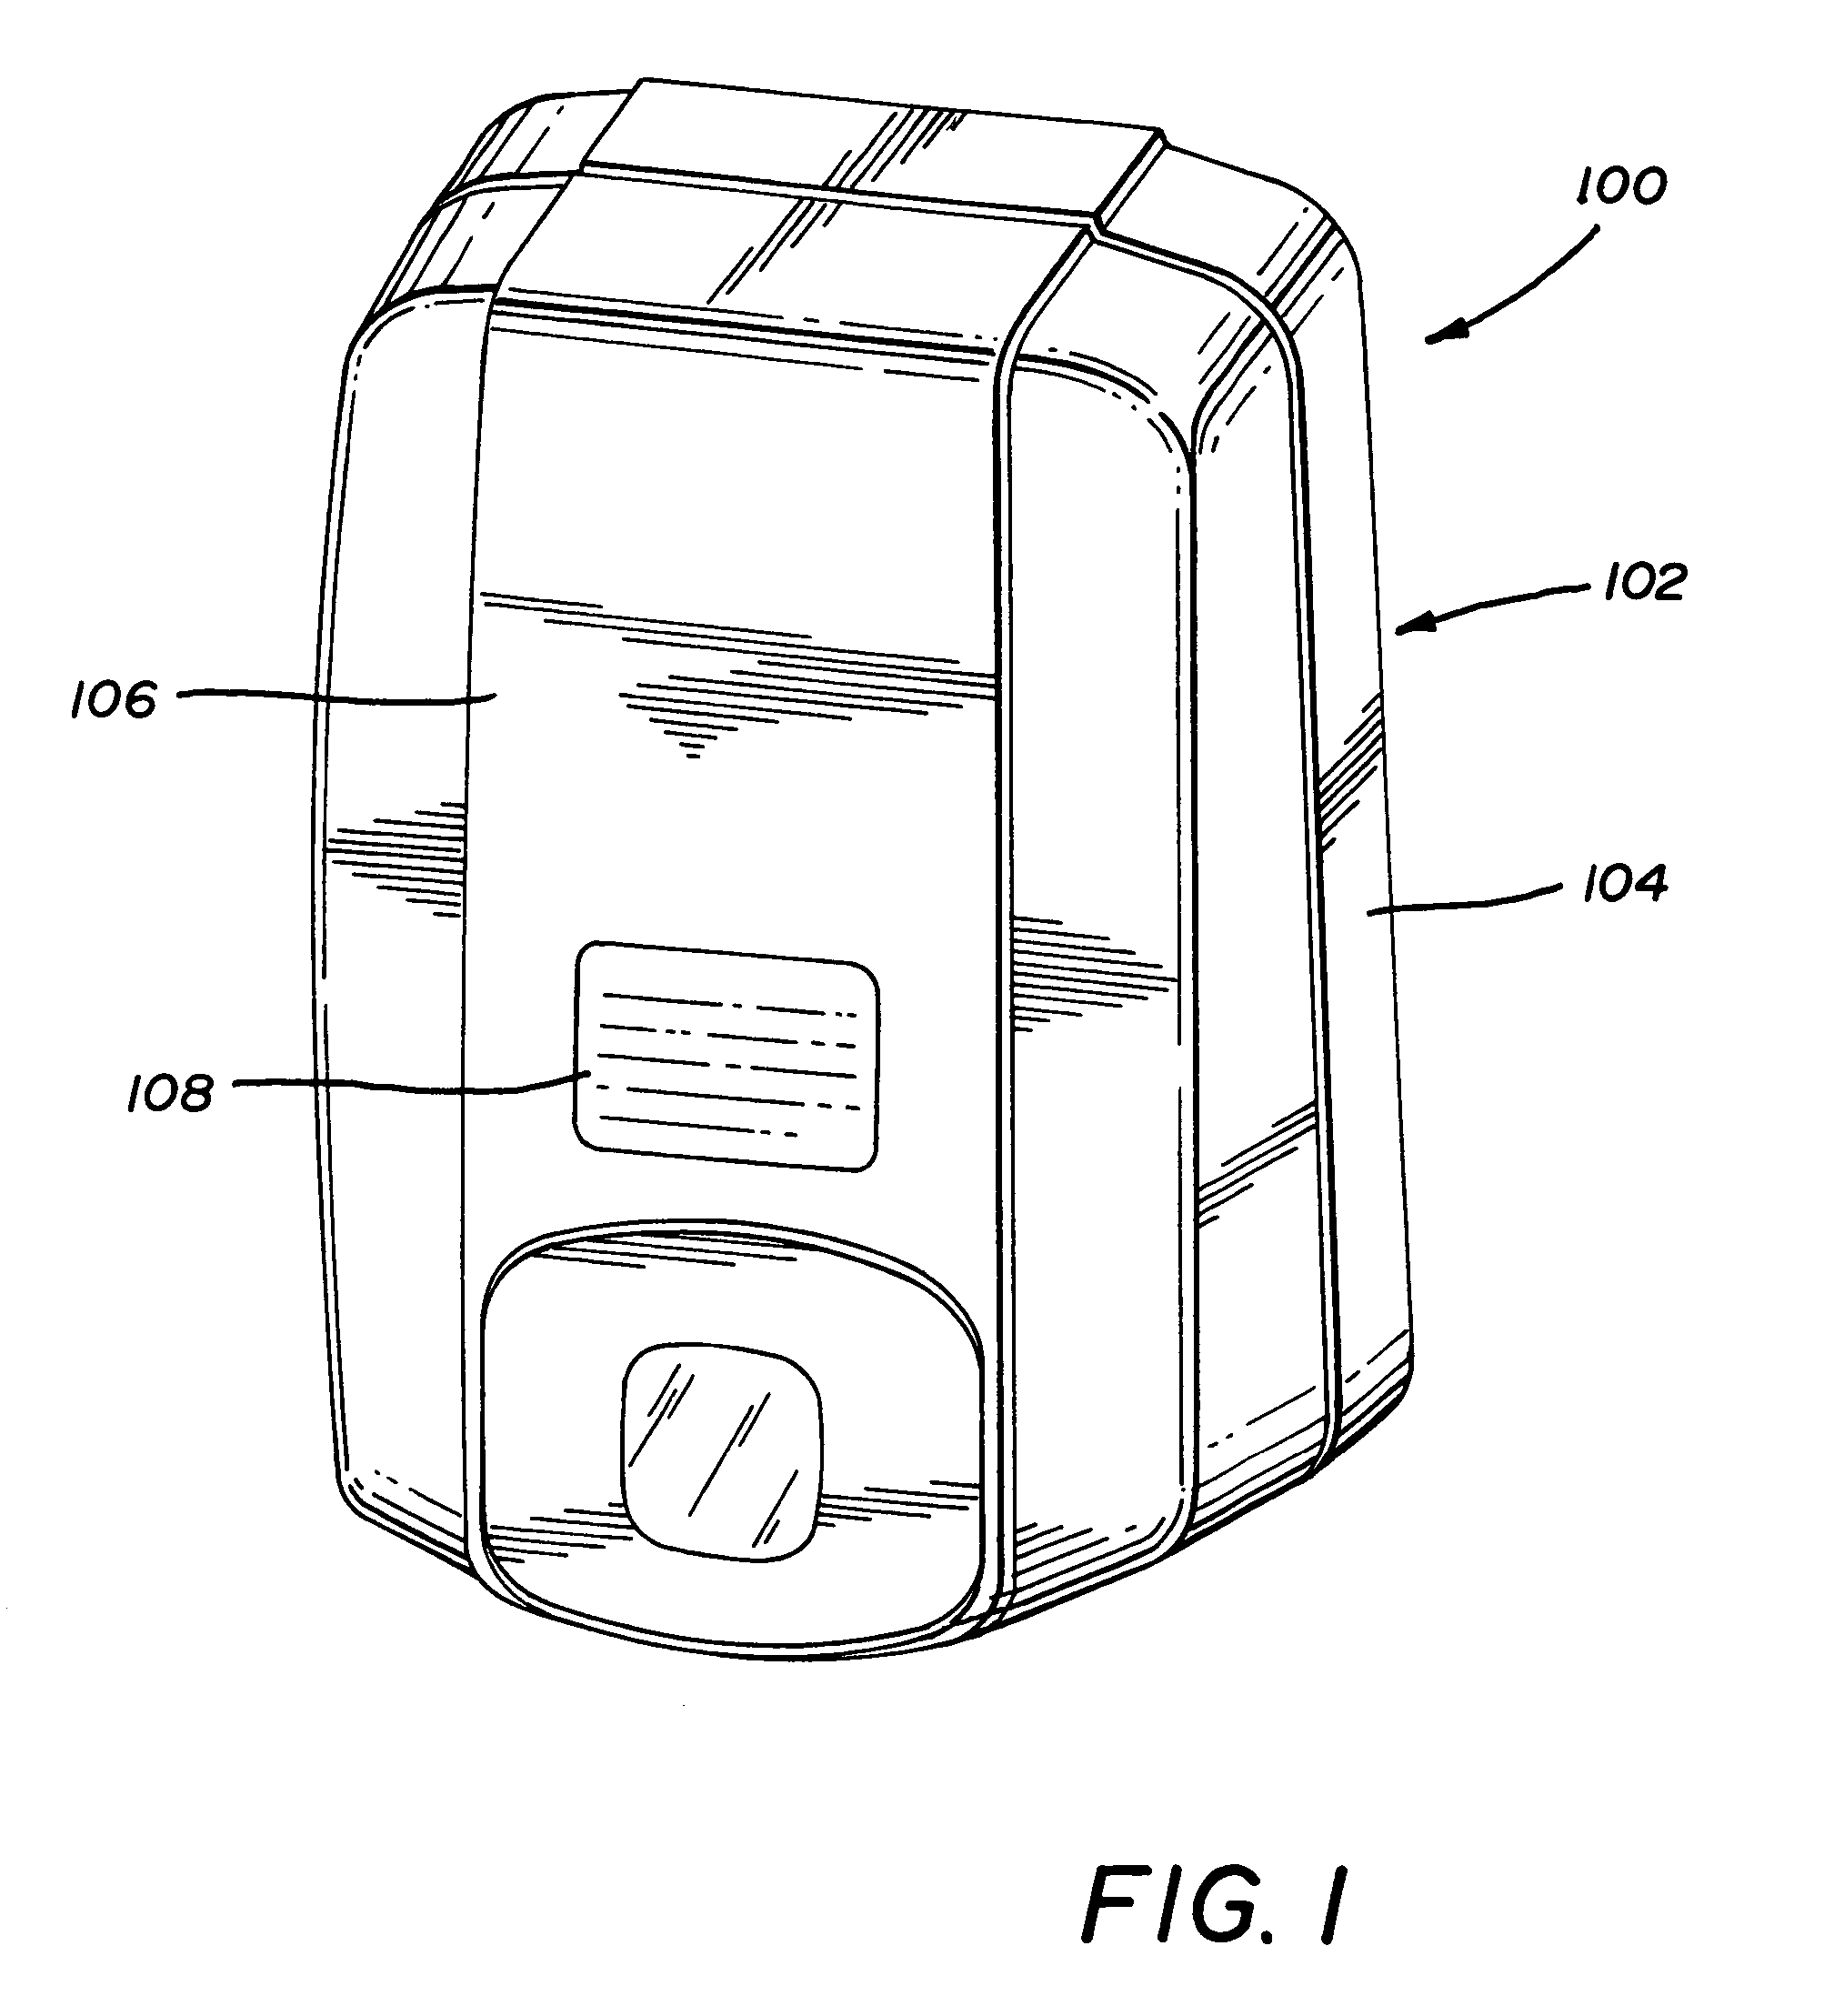 Electronically keyed dispensing systems and related methods of installation and use